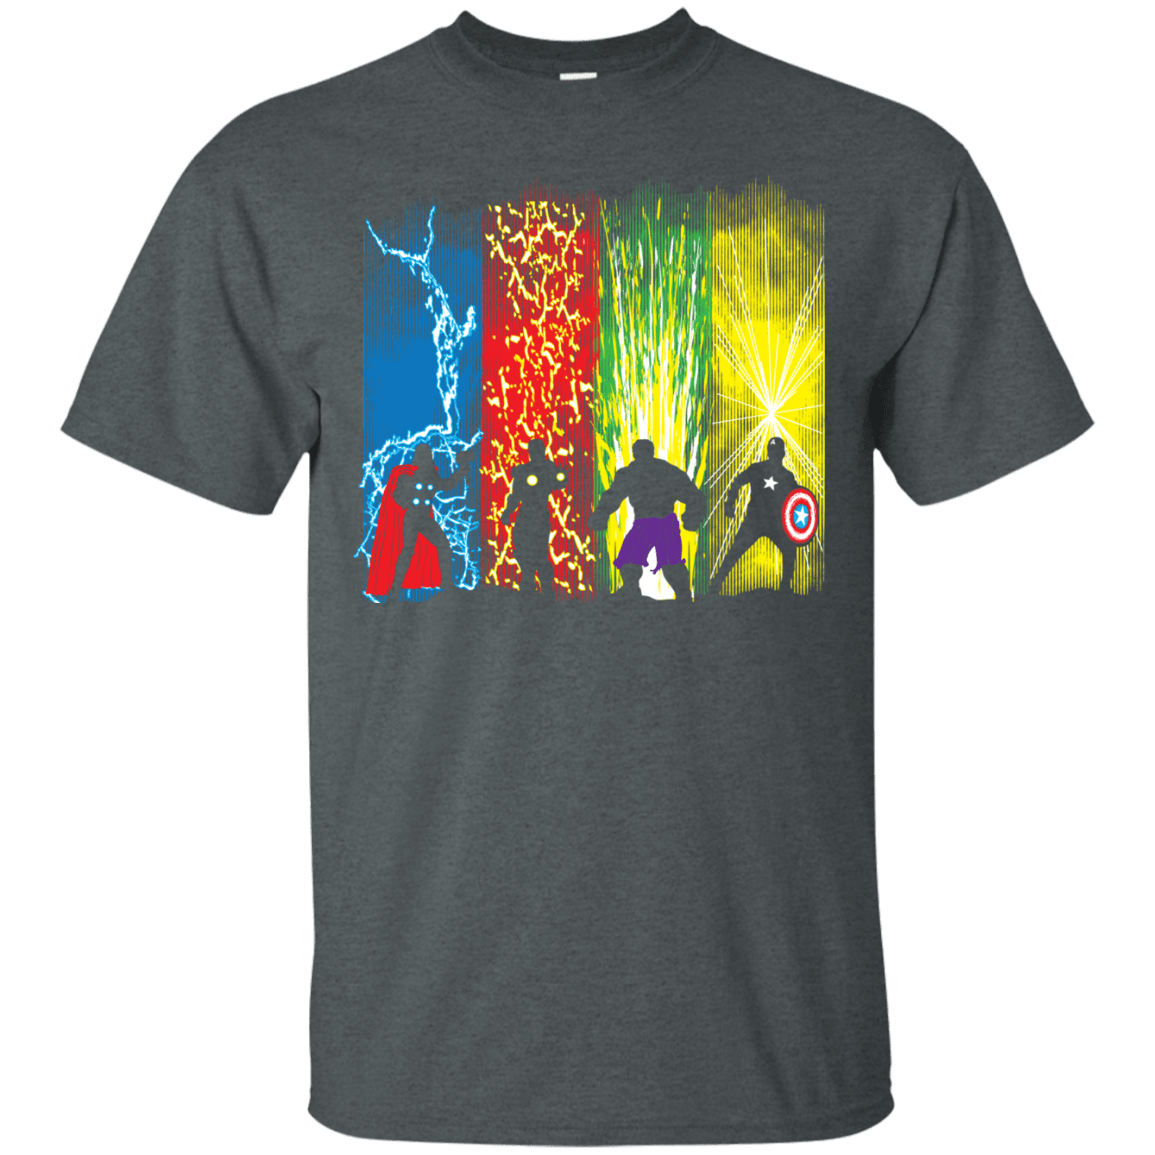 T-Shirts Justice Prevails T-Shirt